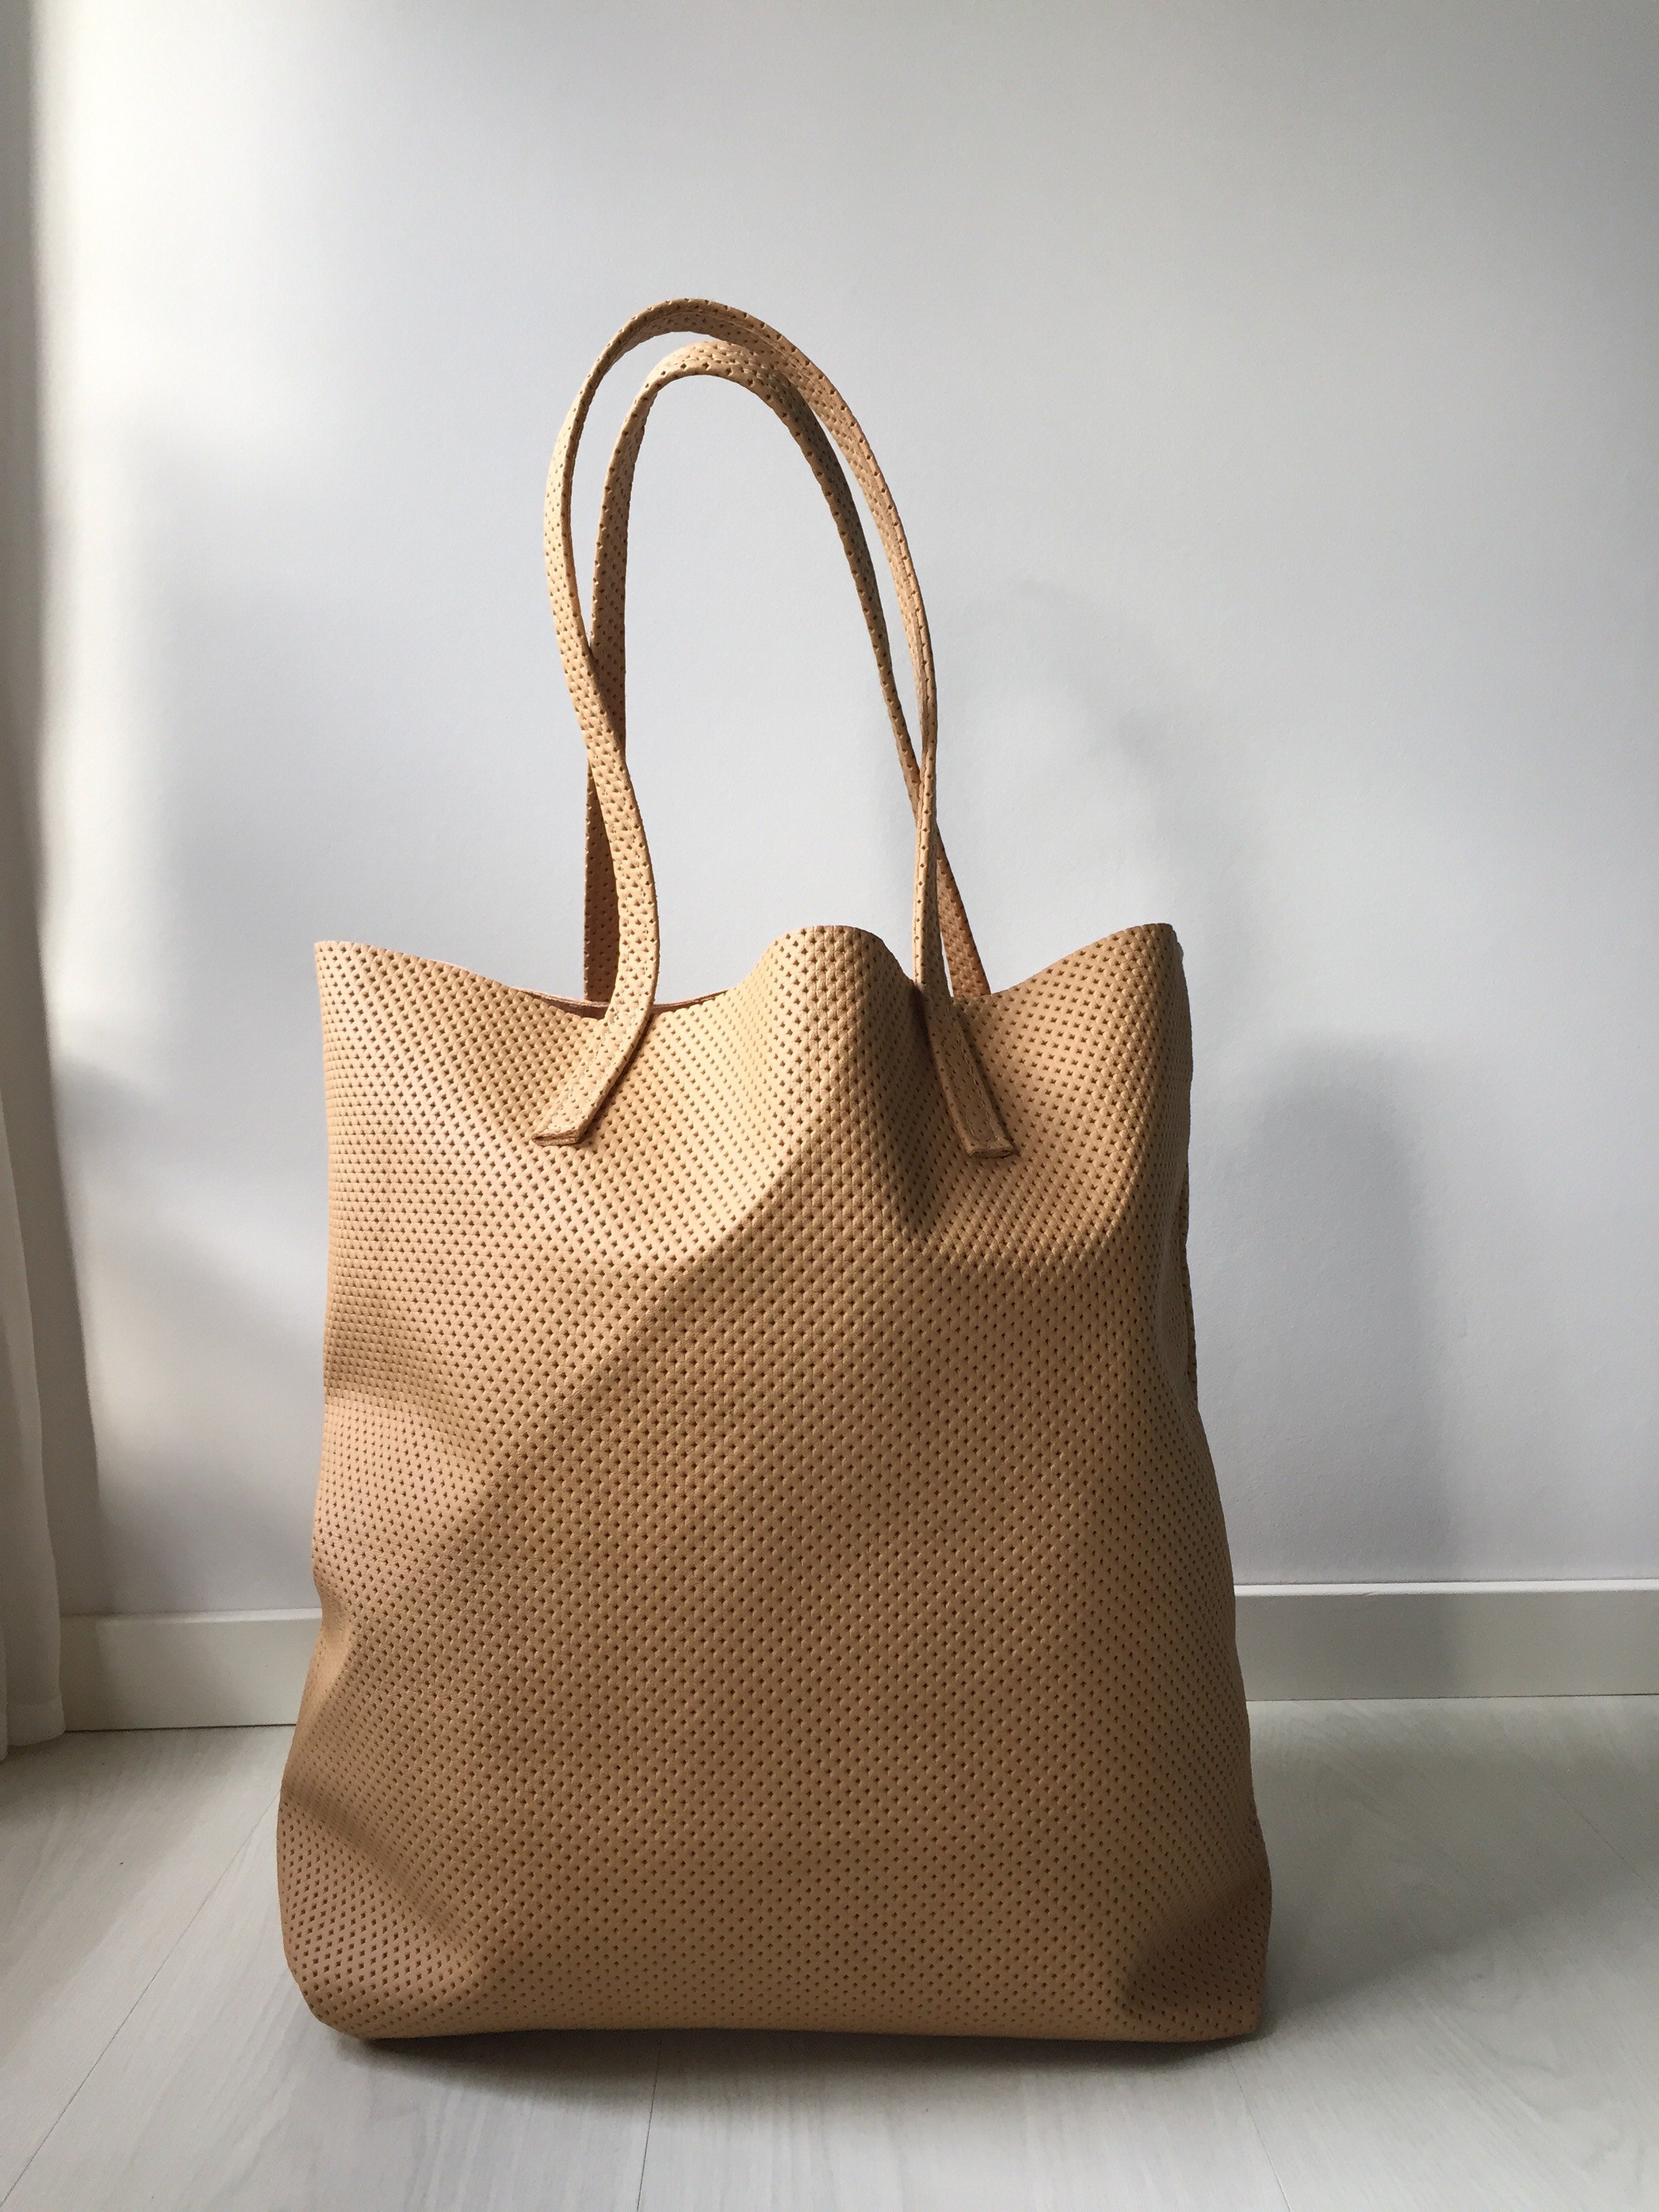 Raw Leather Tote Bag - Tan Perforated Leather